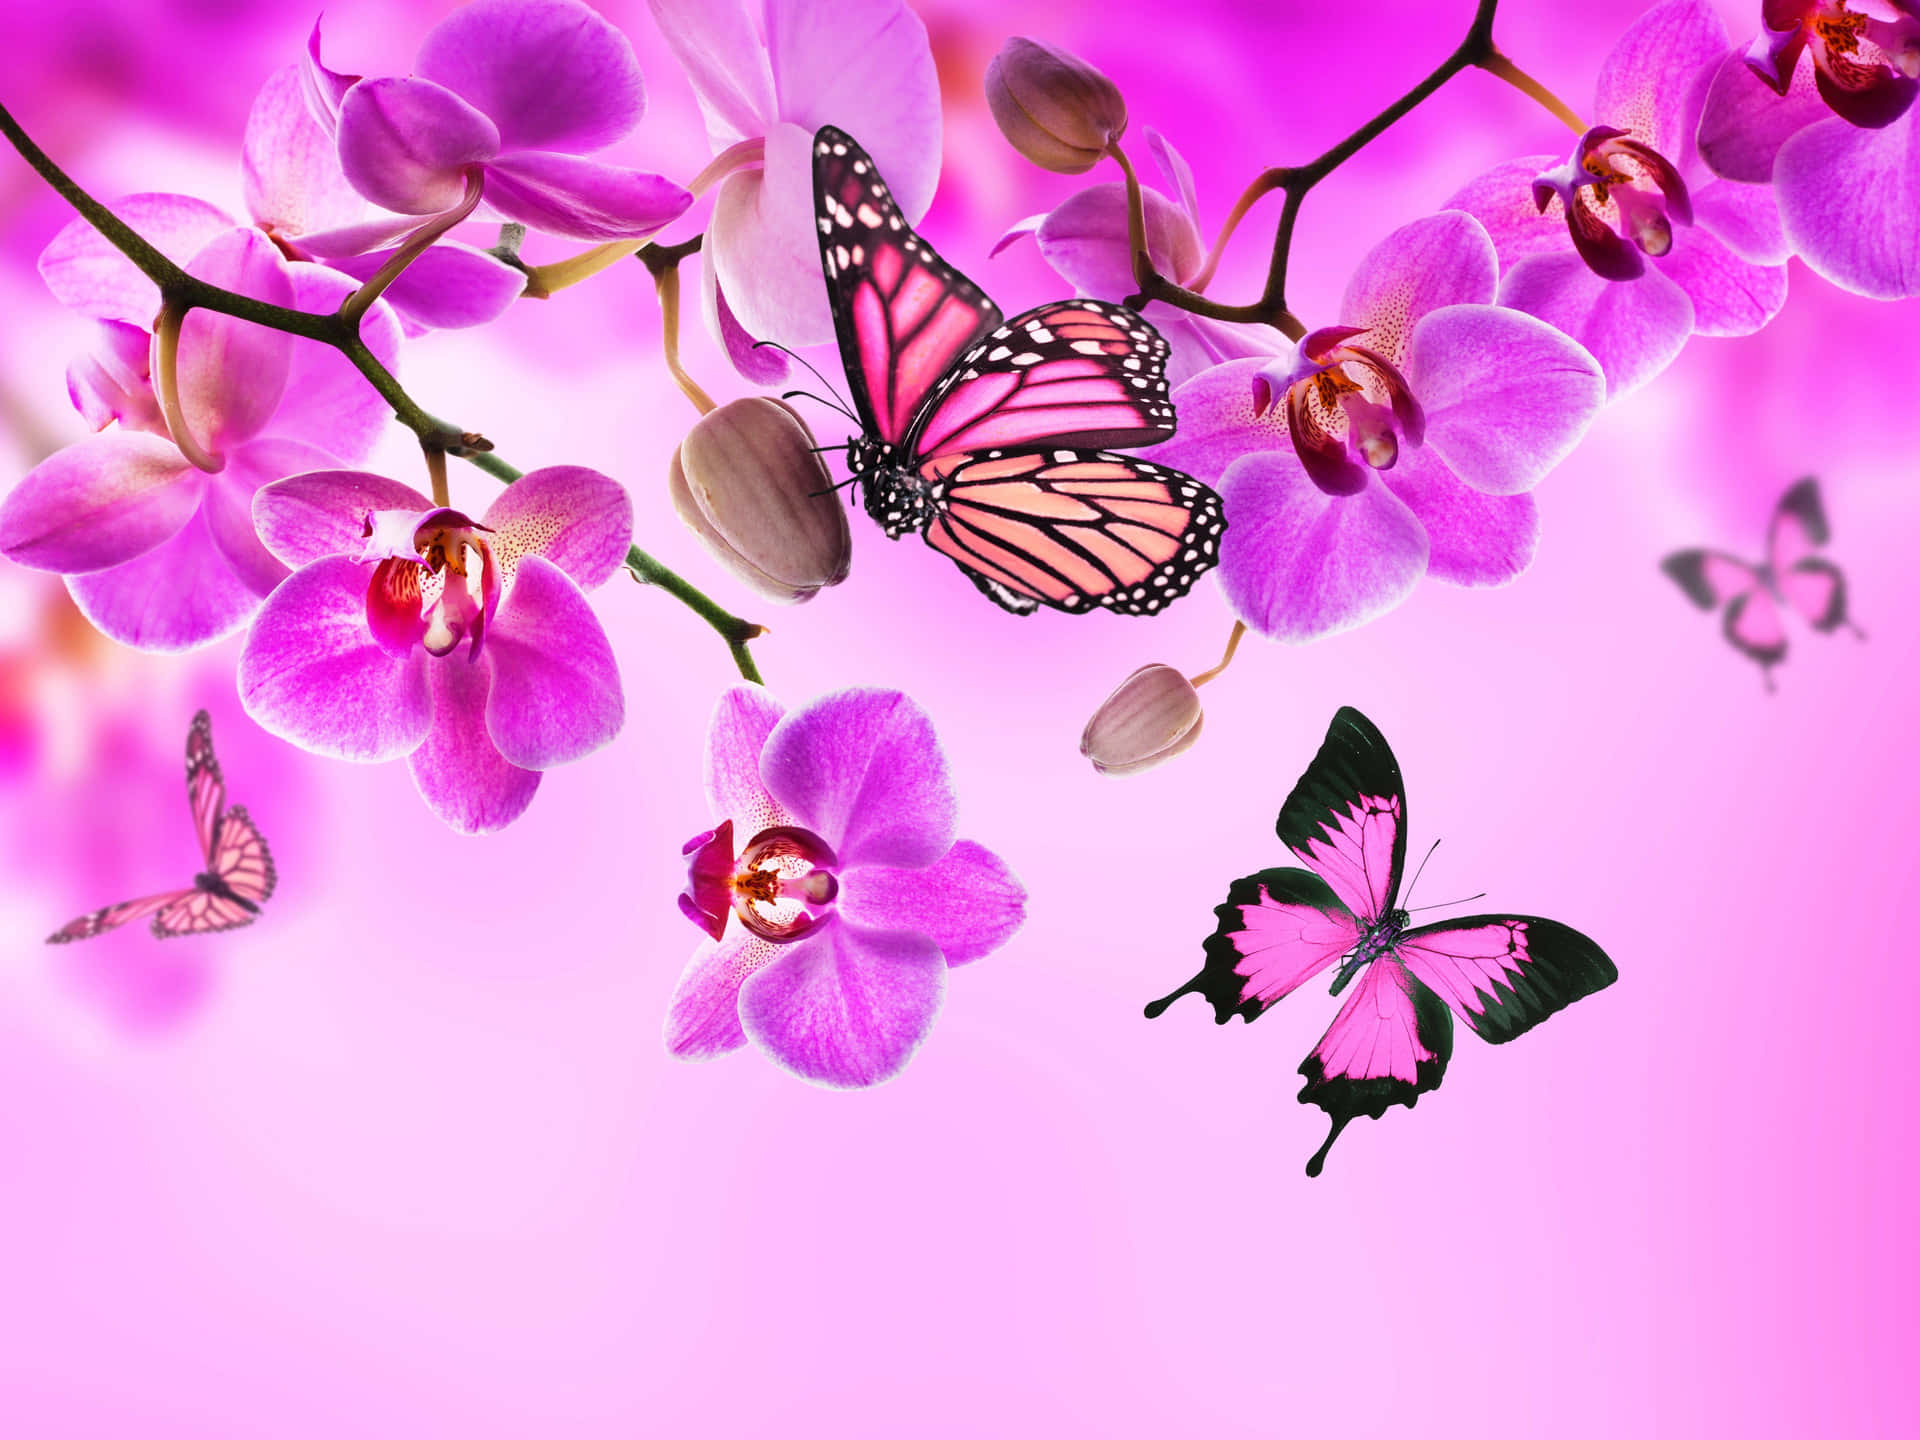 Cute Pink Flowers And Butterflies Background